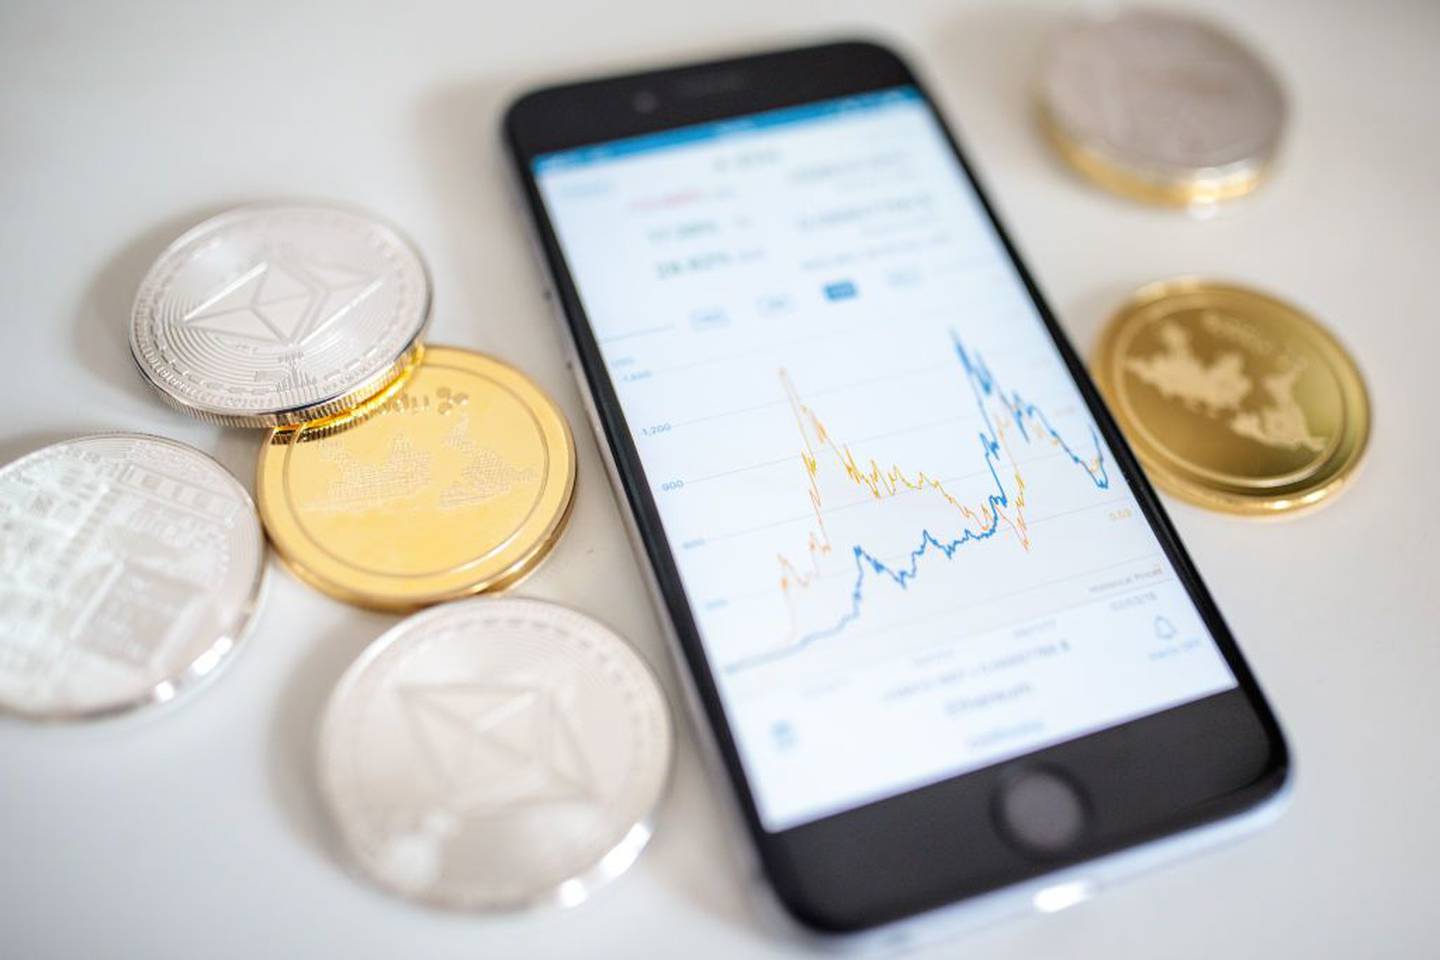 In this photo illustration of the litecoin, ripple and ethereum cryptocurrency 'altcoins' sit arranged for a photograph beside a smartphone displaying the current price chart for ethereum.